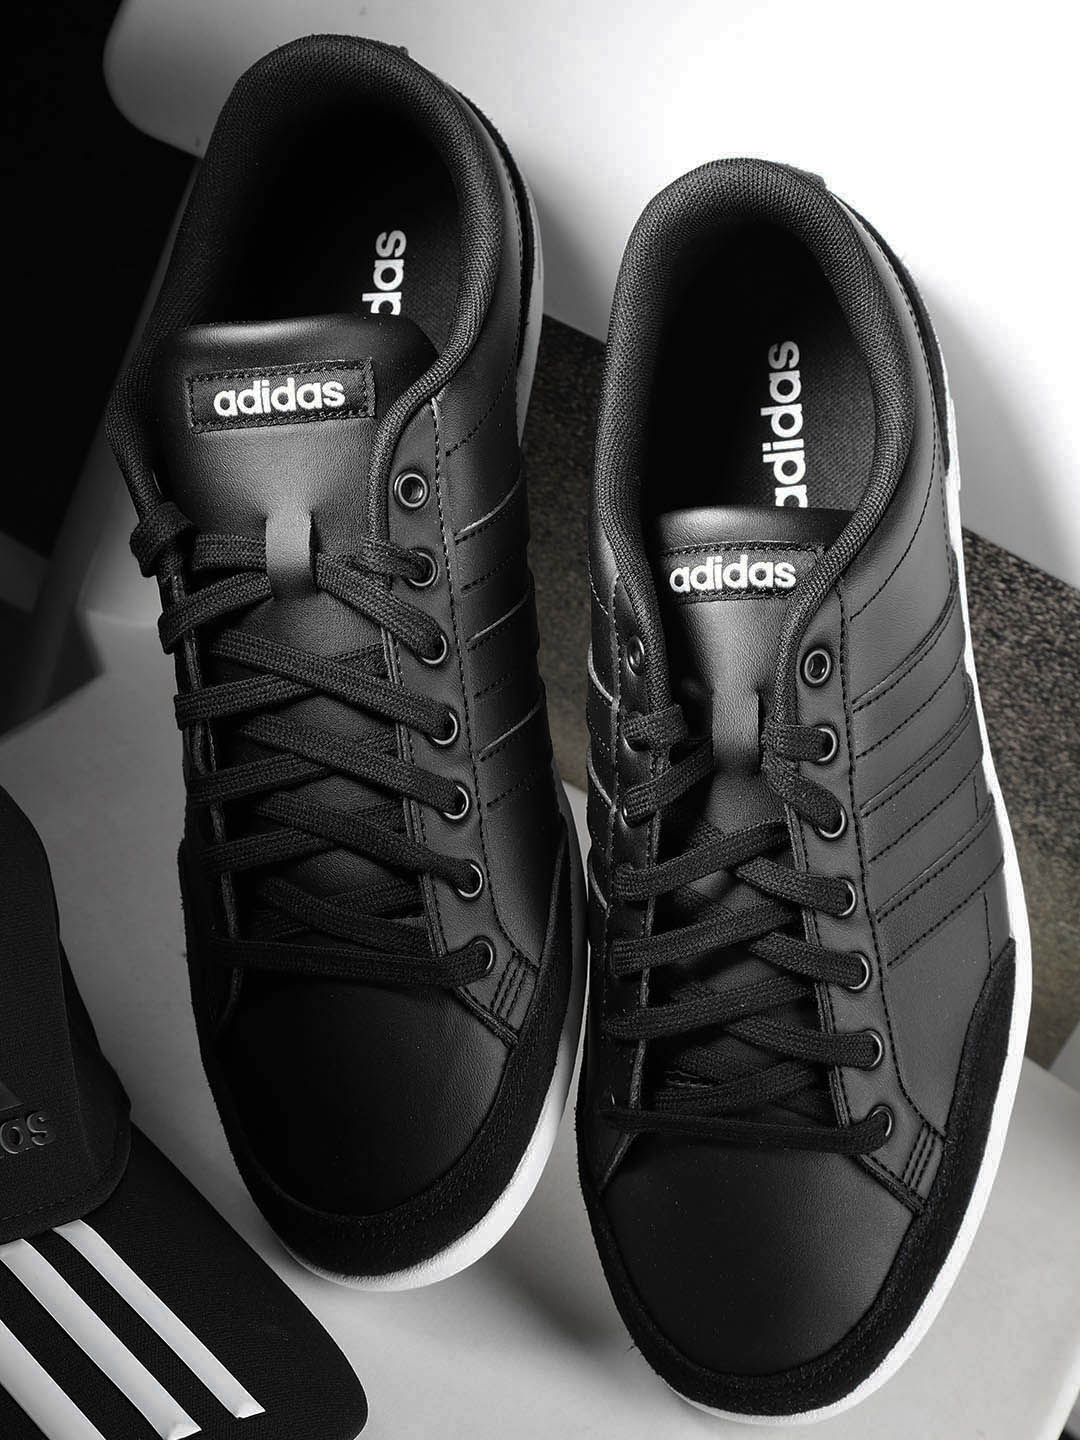 caflaire shoes adidas